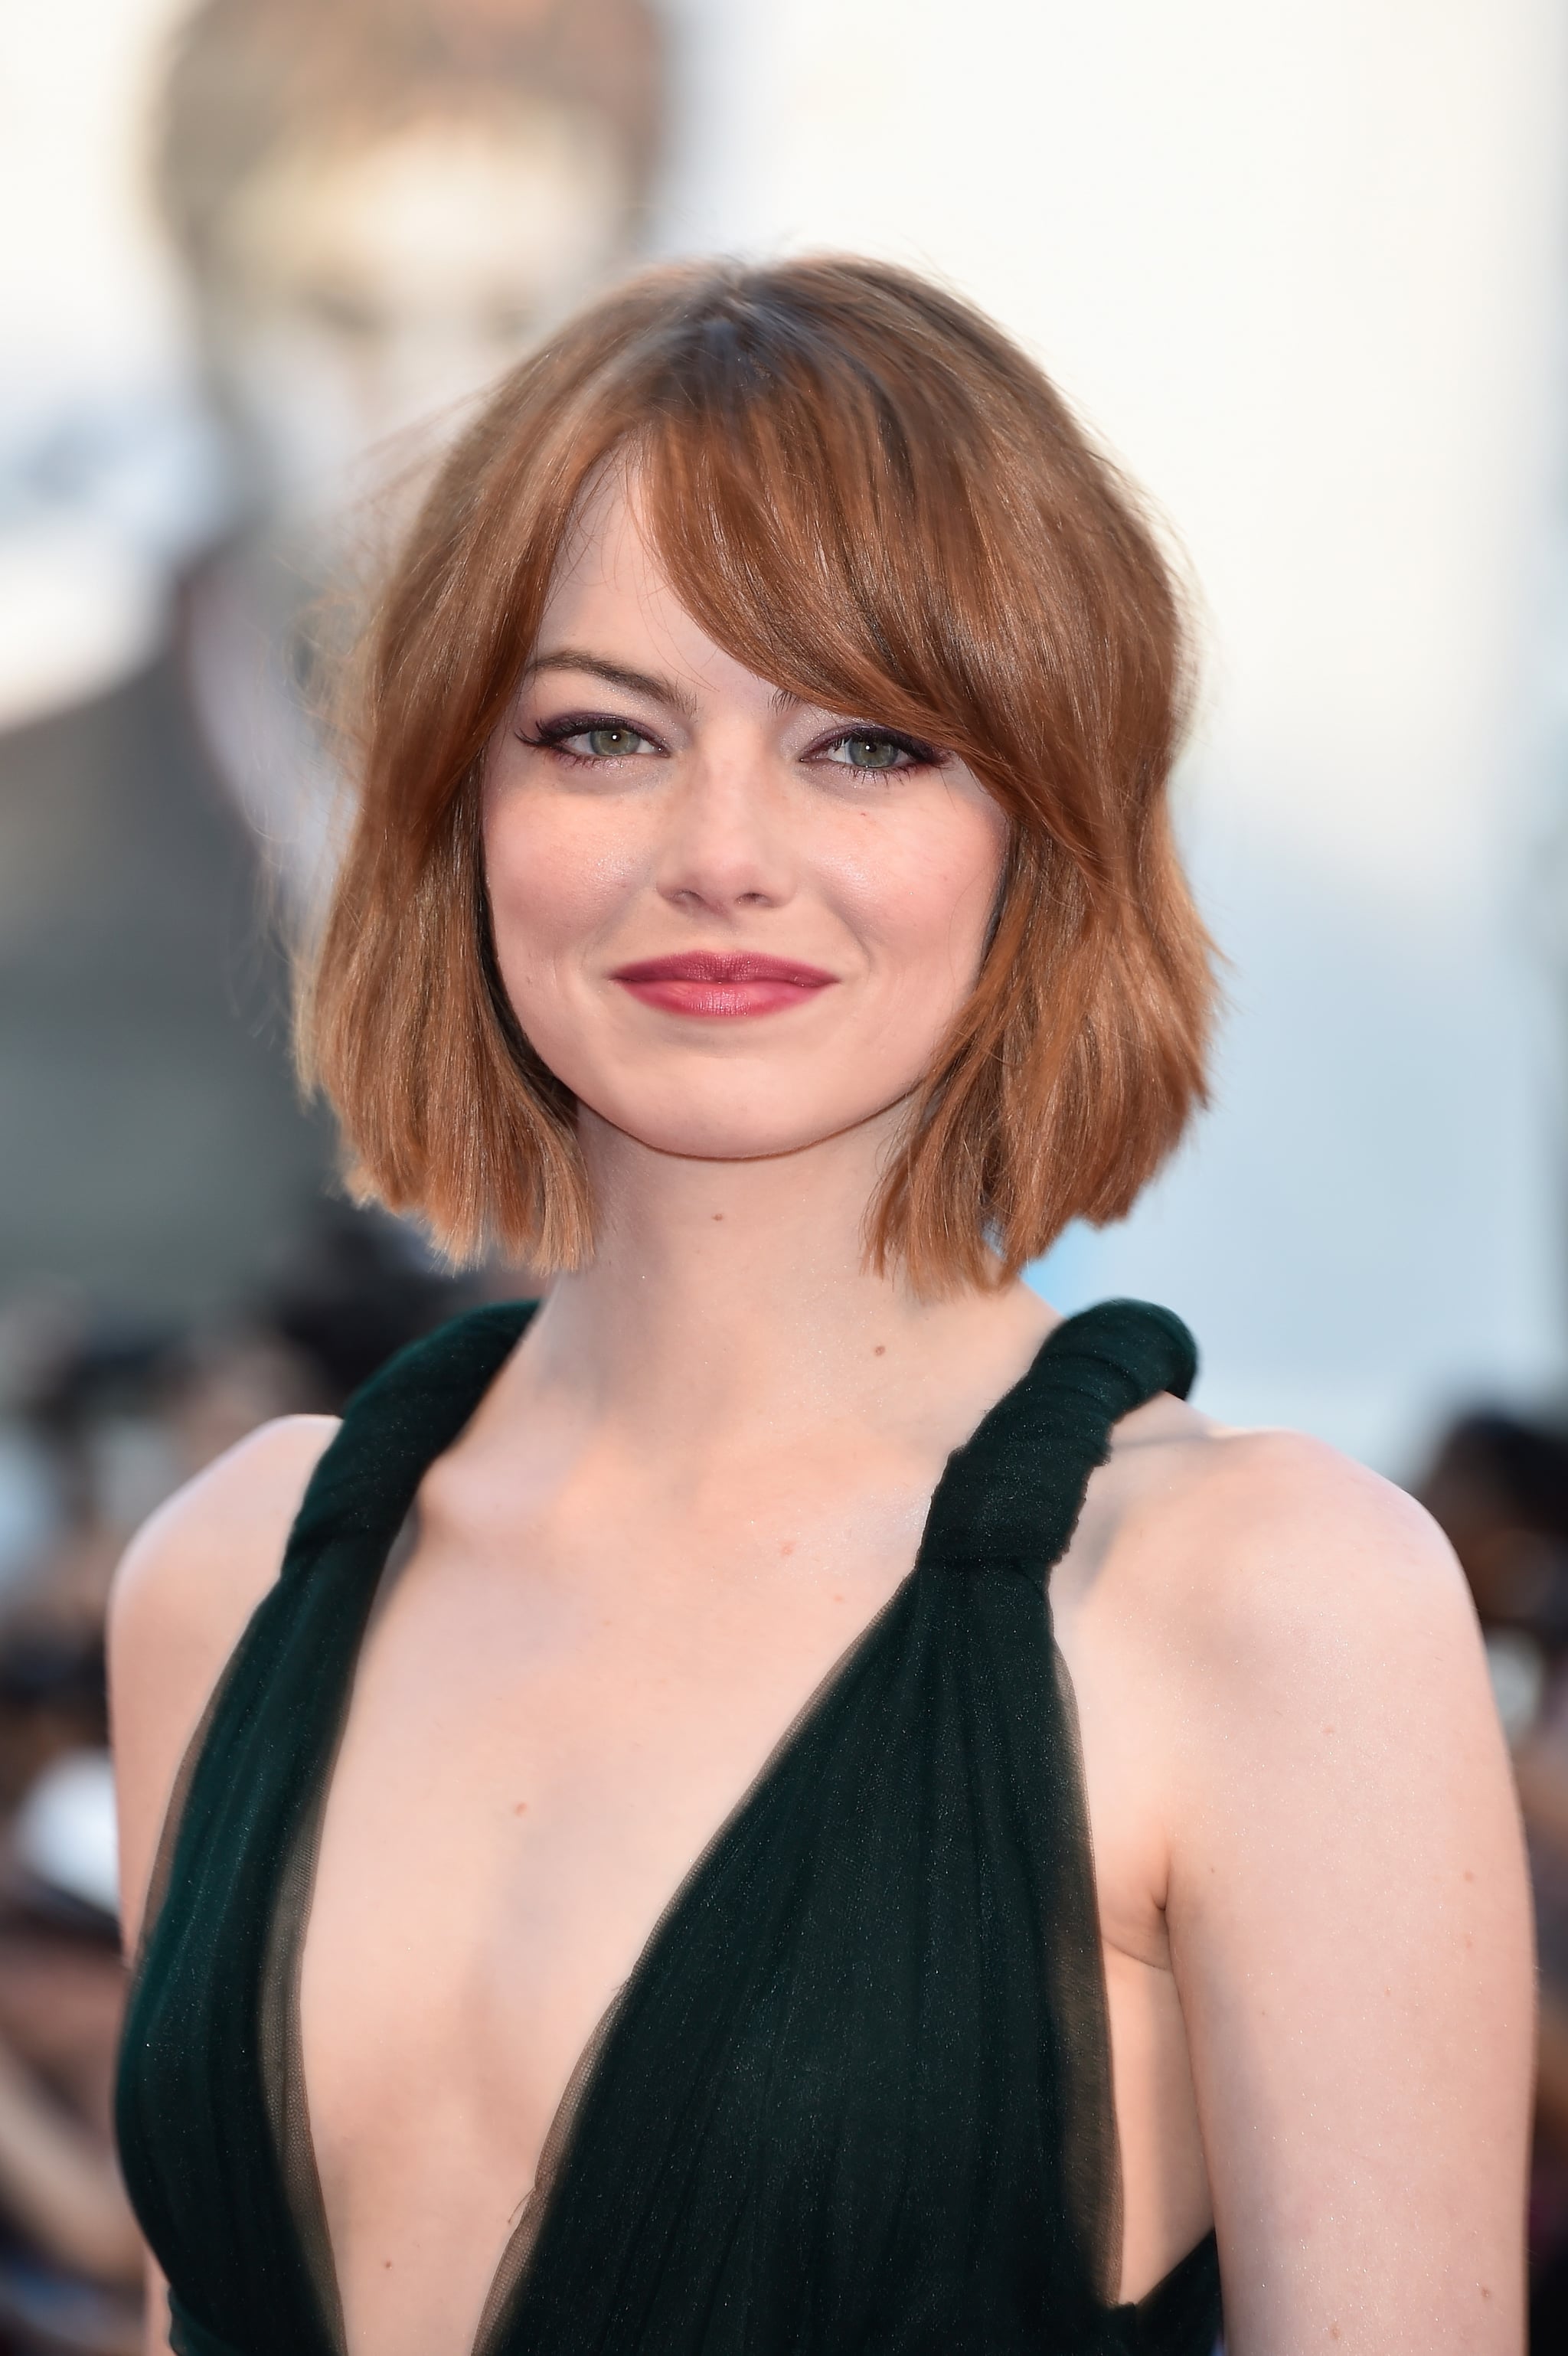 Emma Stone The Wob (Wavy Lob!) Is the Hot New Hollywood Hairstyle